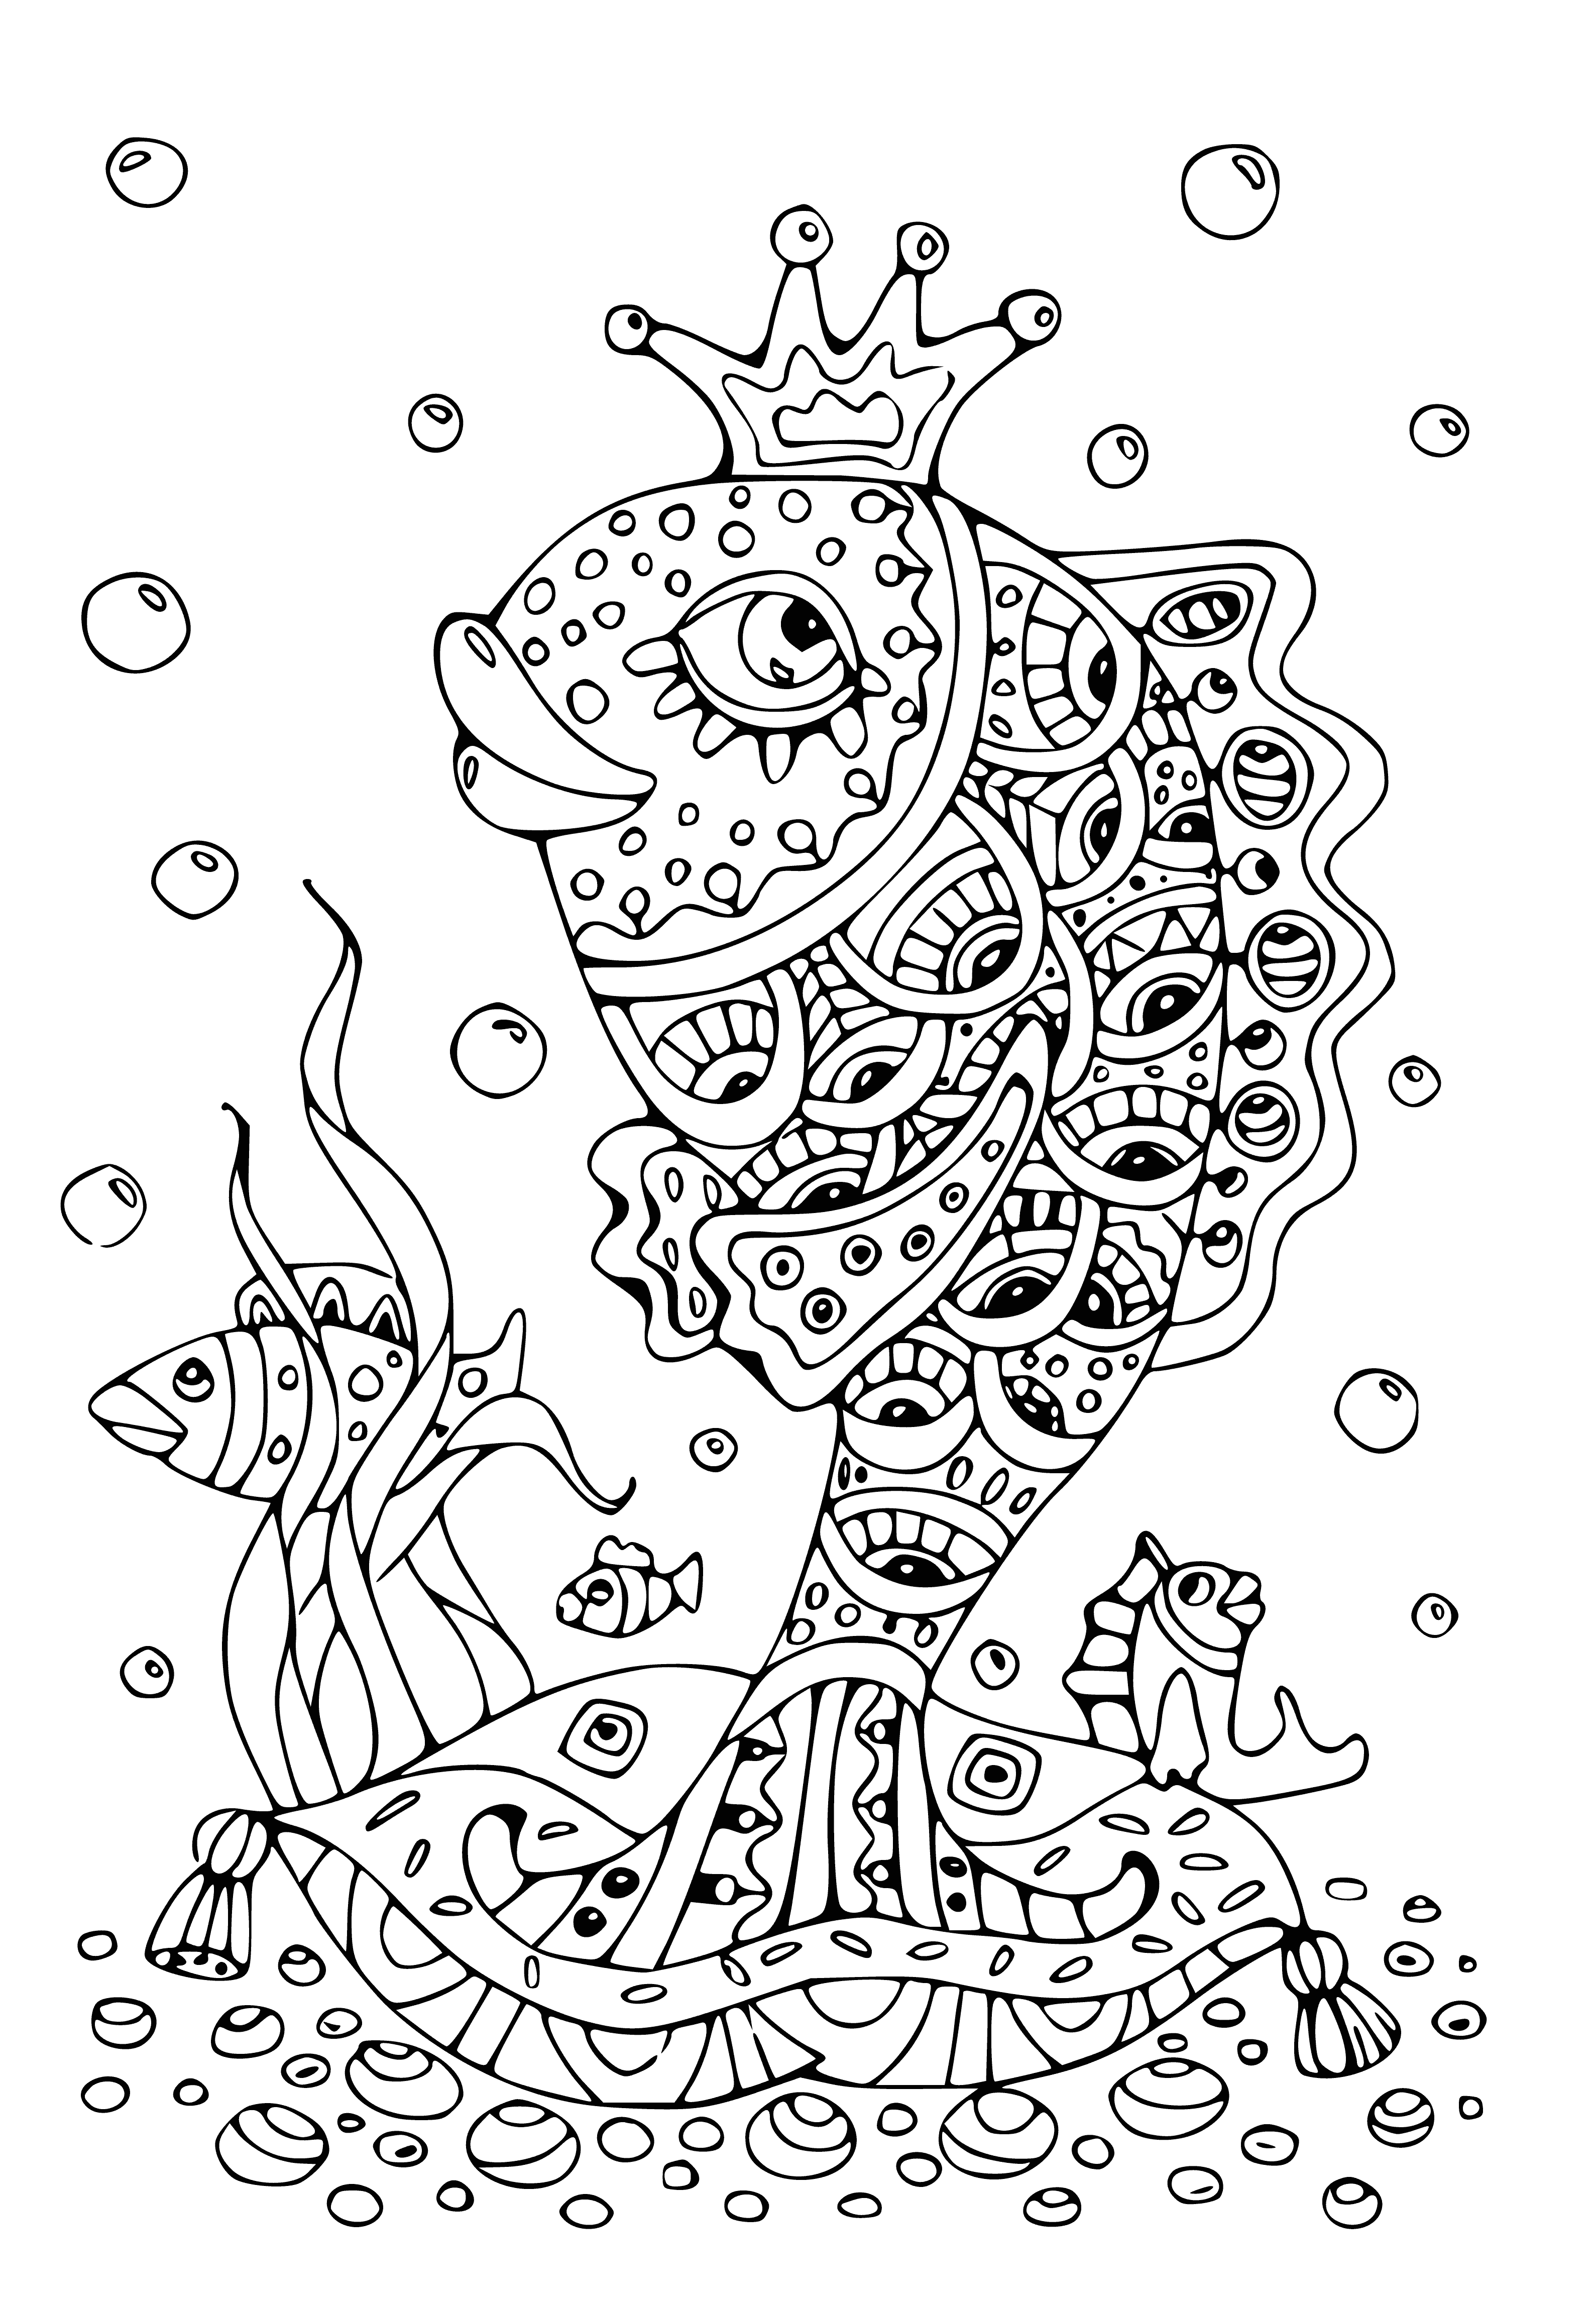 coloring page: Alexander Pushkin writing a book with a quill while a goldfish swims in a bowl nearby.